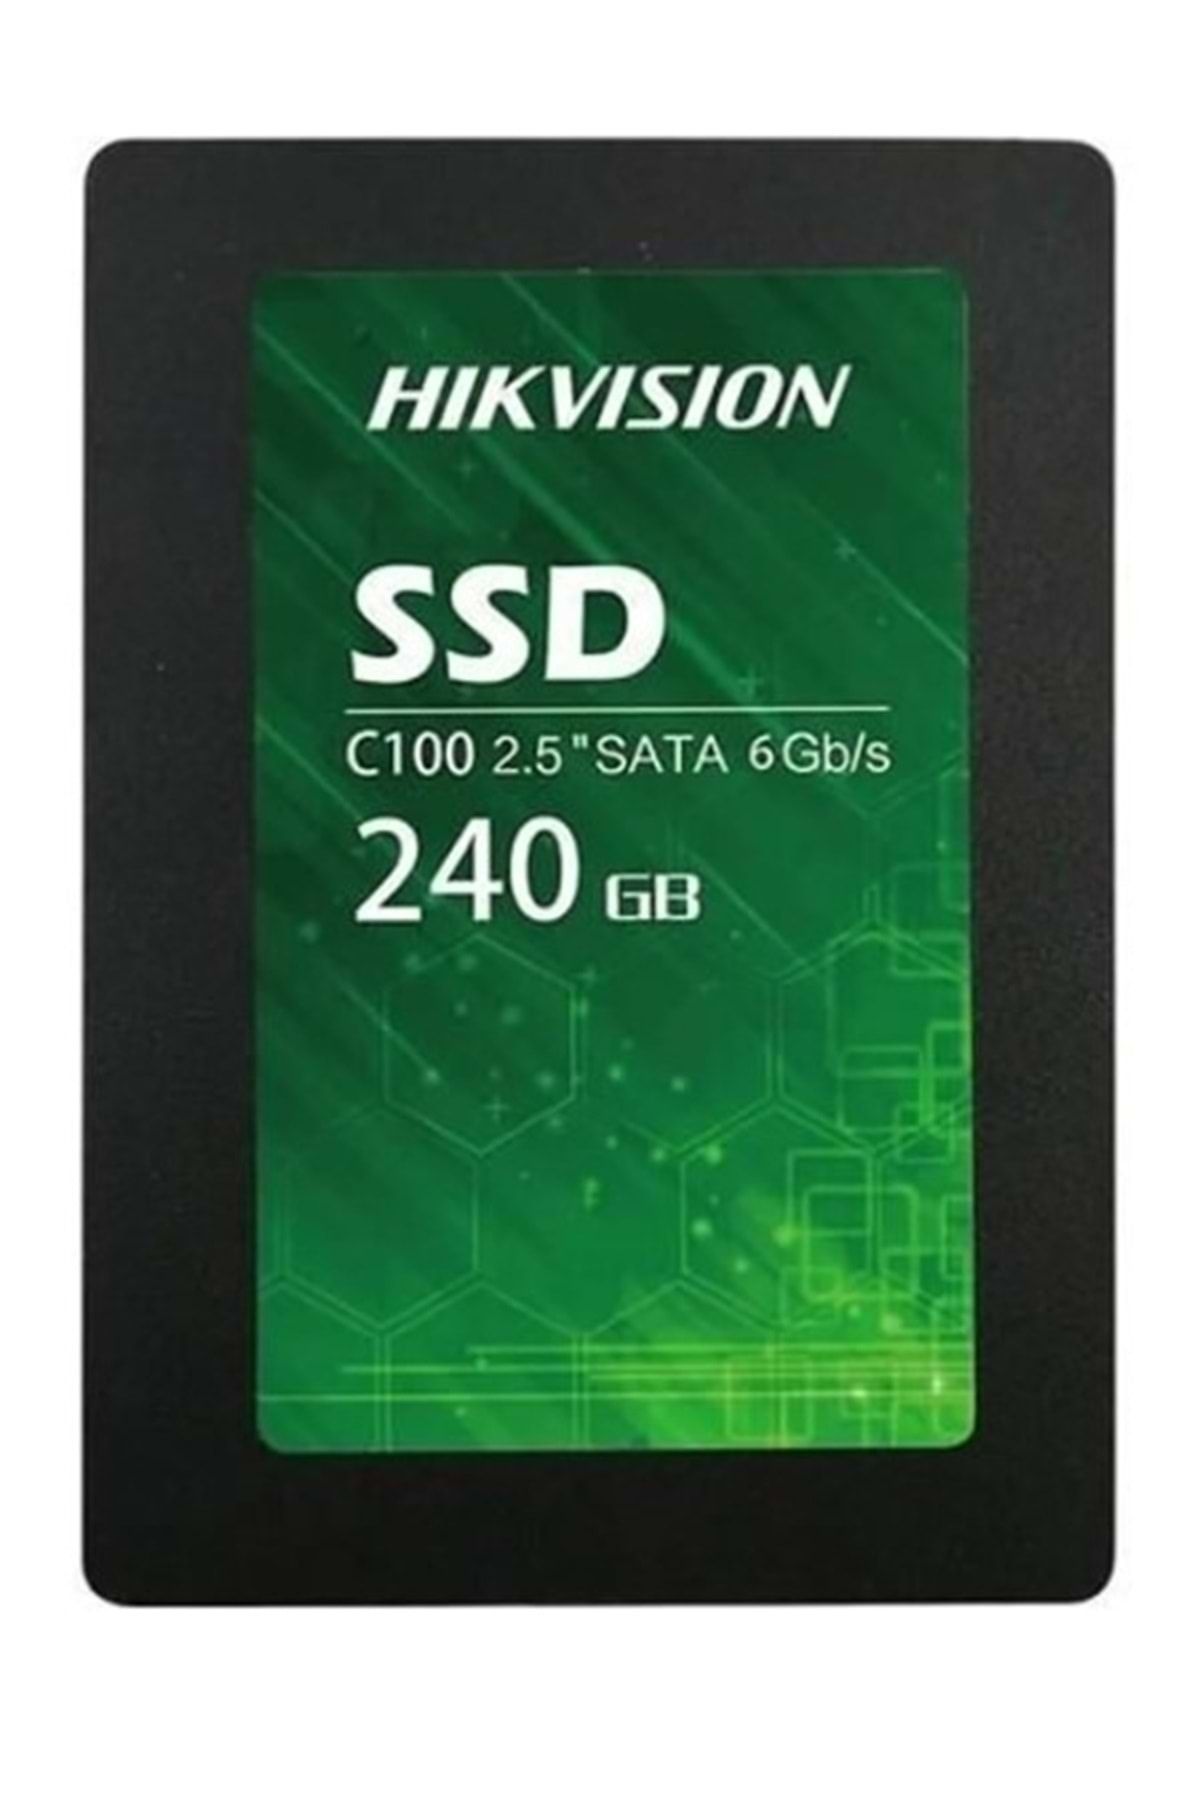 Hikvision 240gb 500mb/s /350mb/s 2.5" Ssd Disk